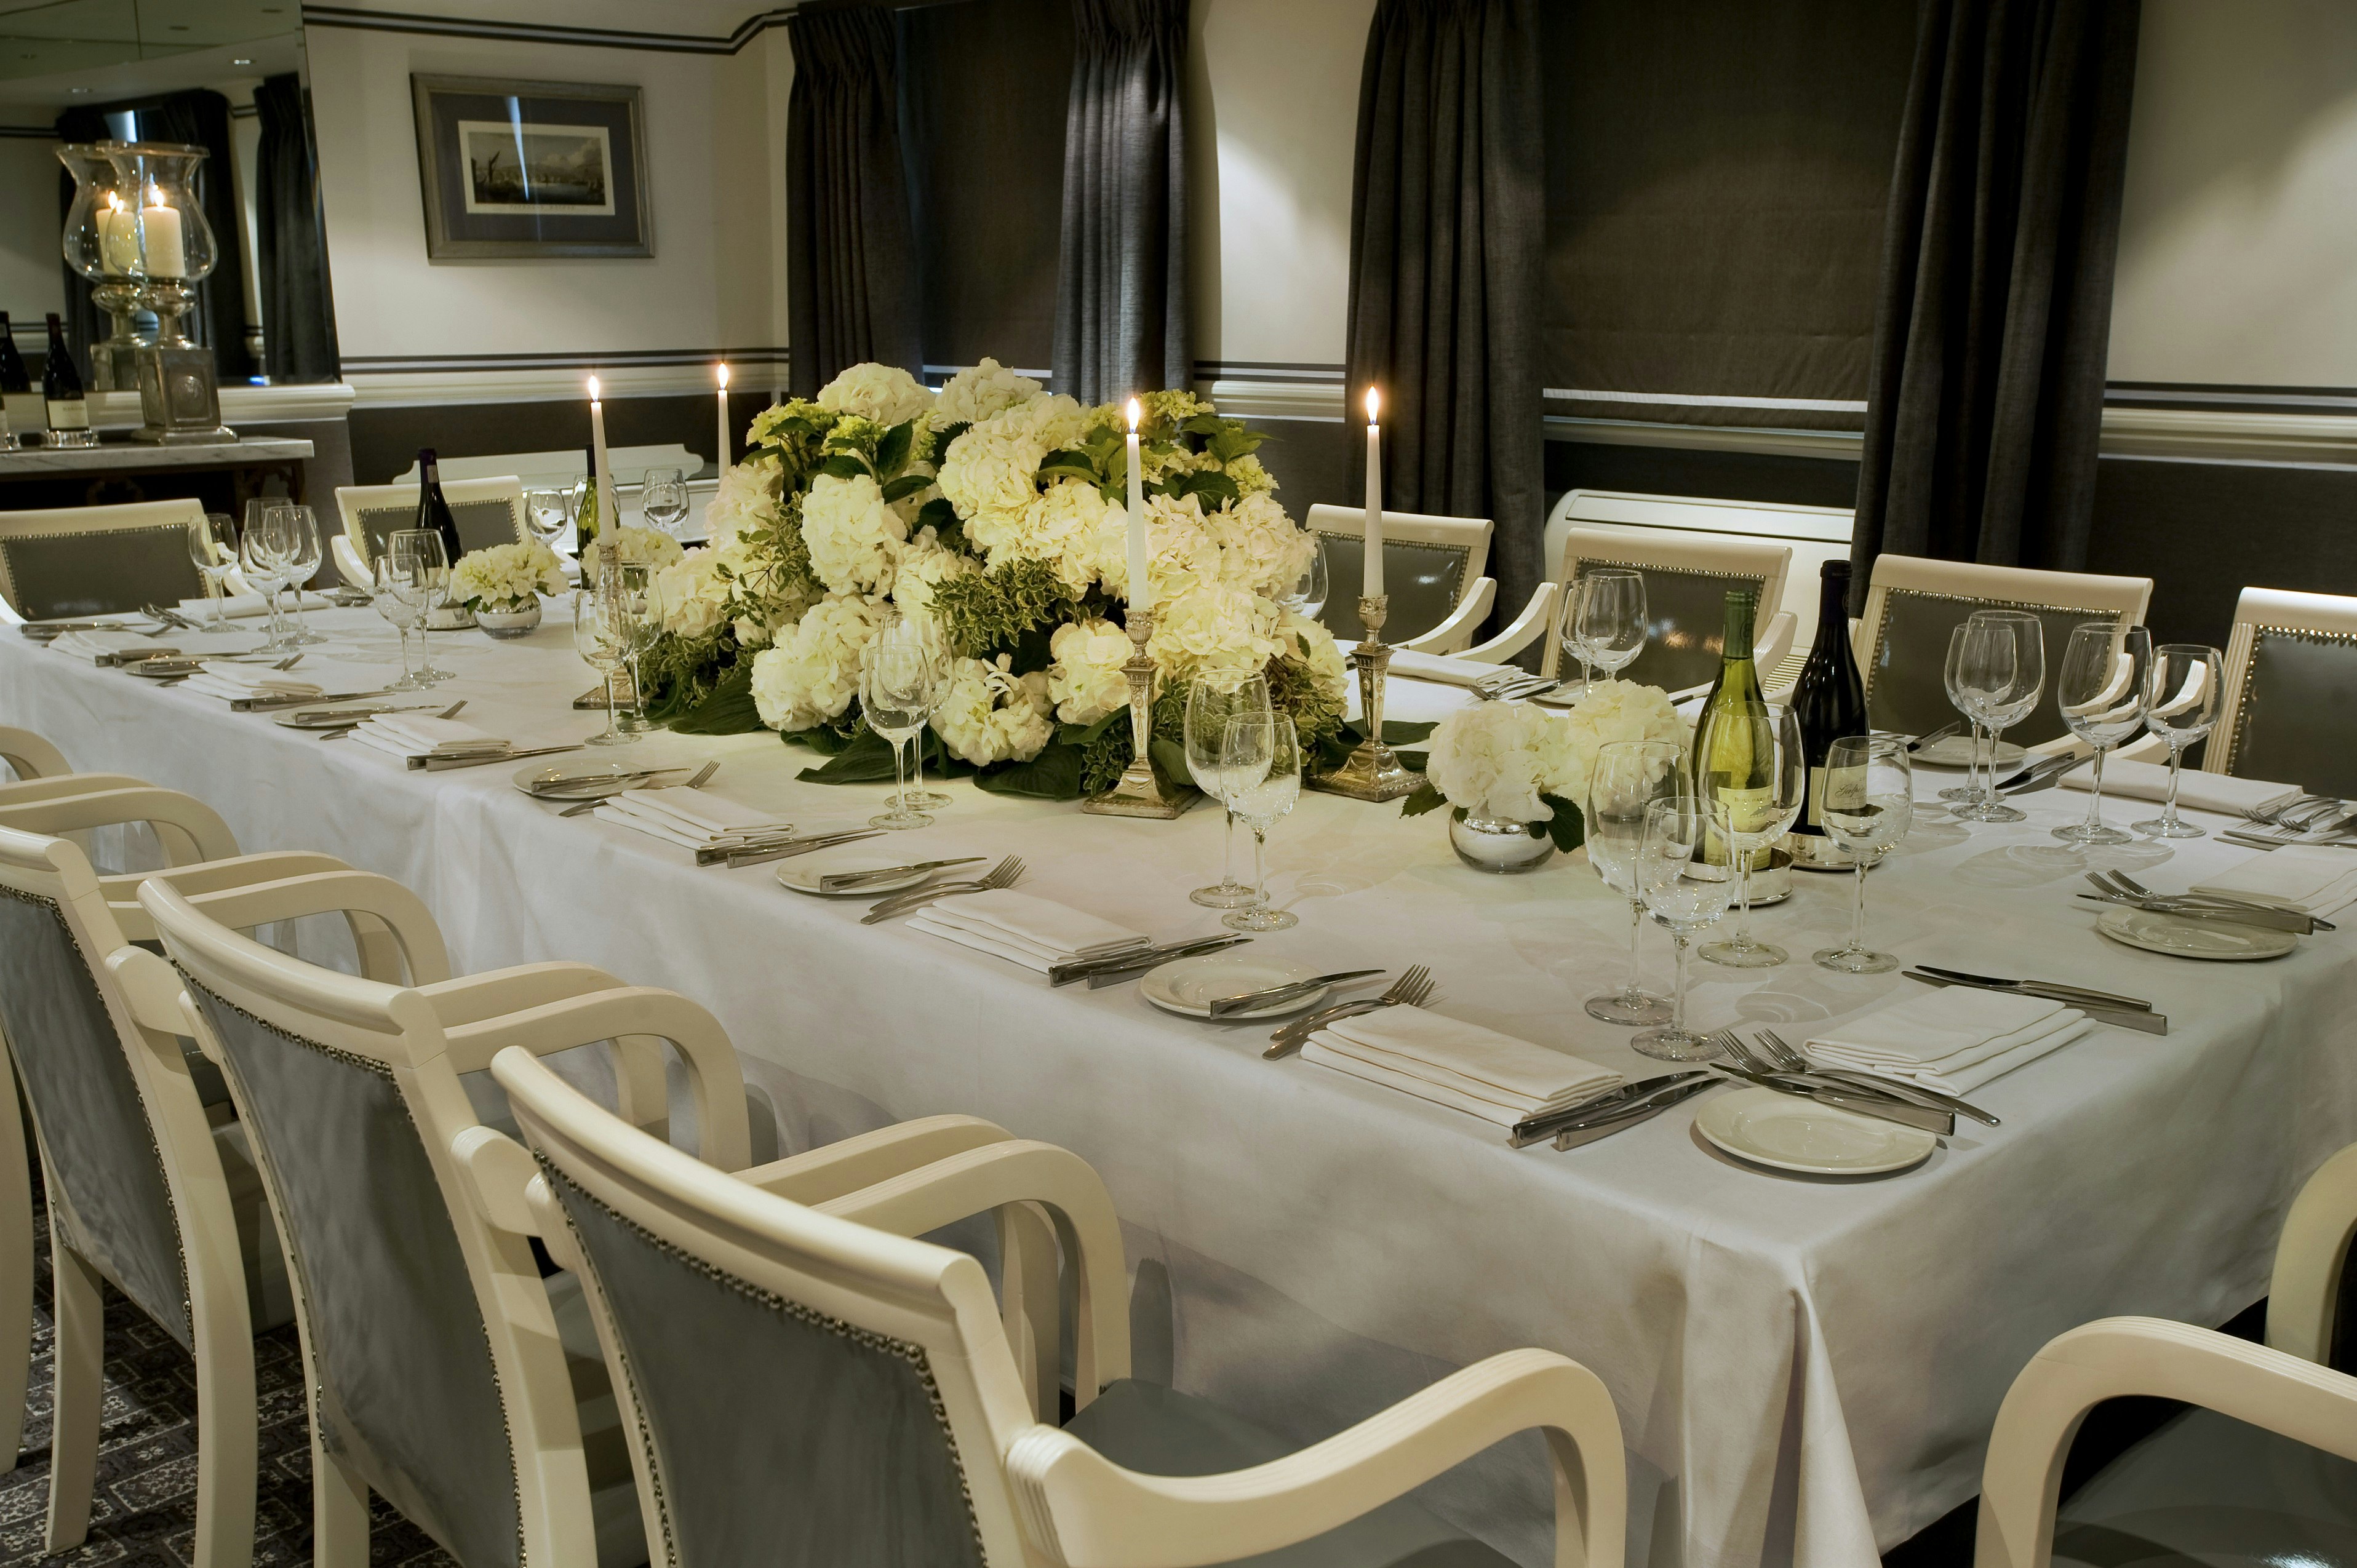 Meeting Rooms Venues in North London - The Montague on the Gardens